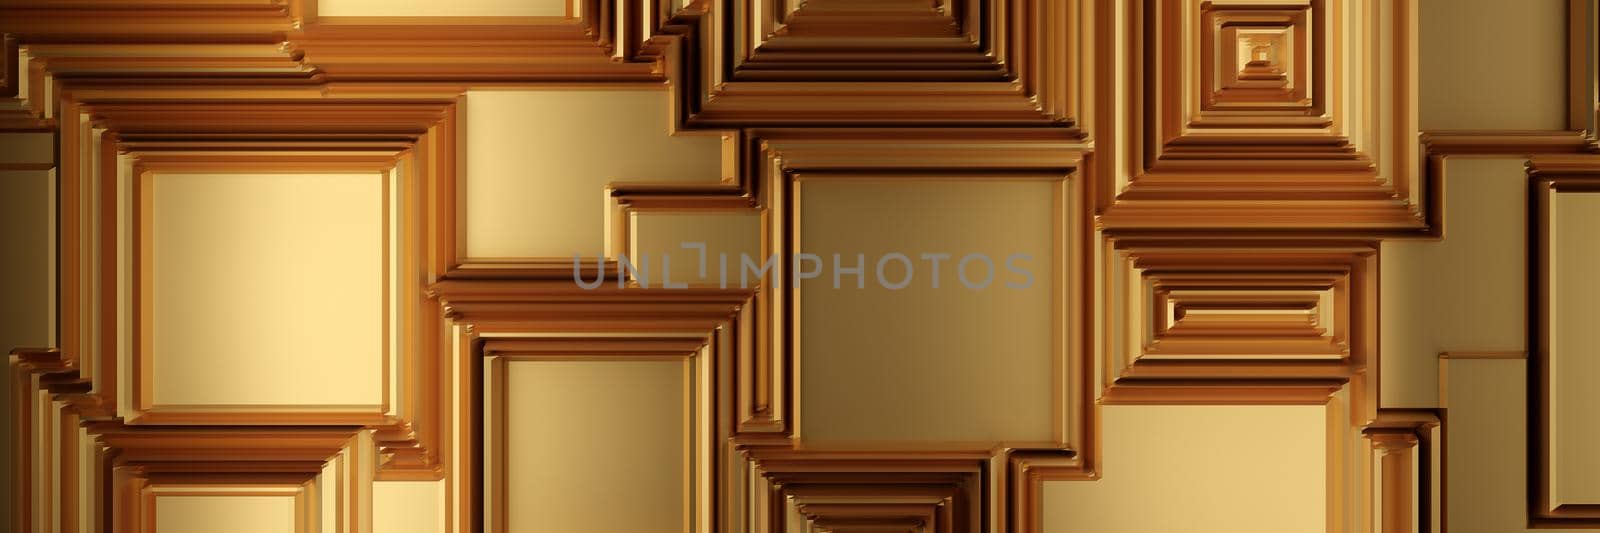 Golden industrial background and stainless steel texture. 3d rendering